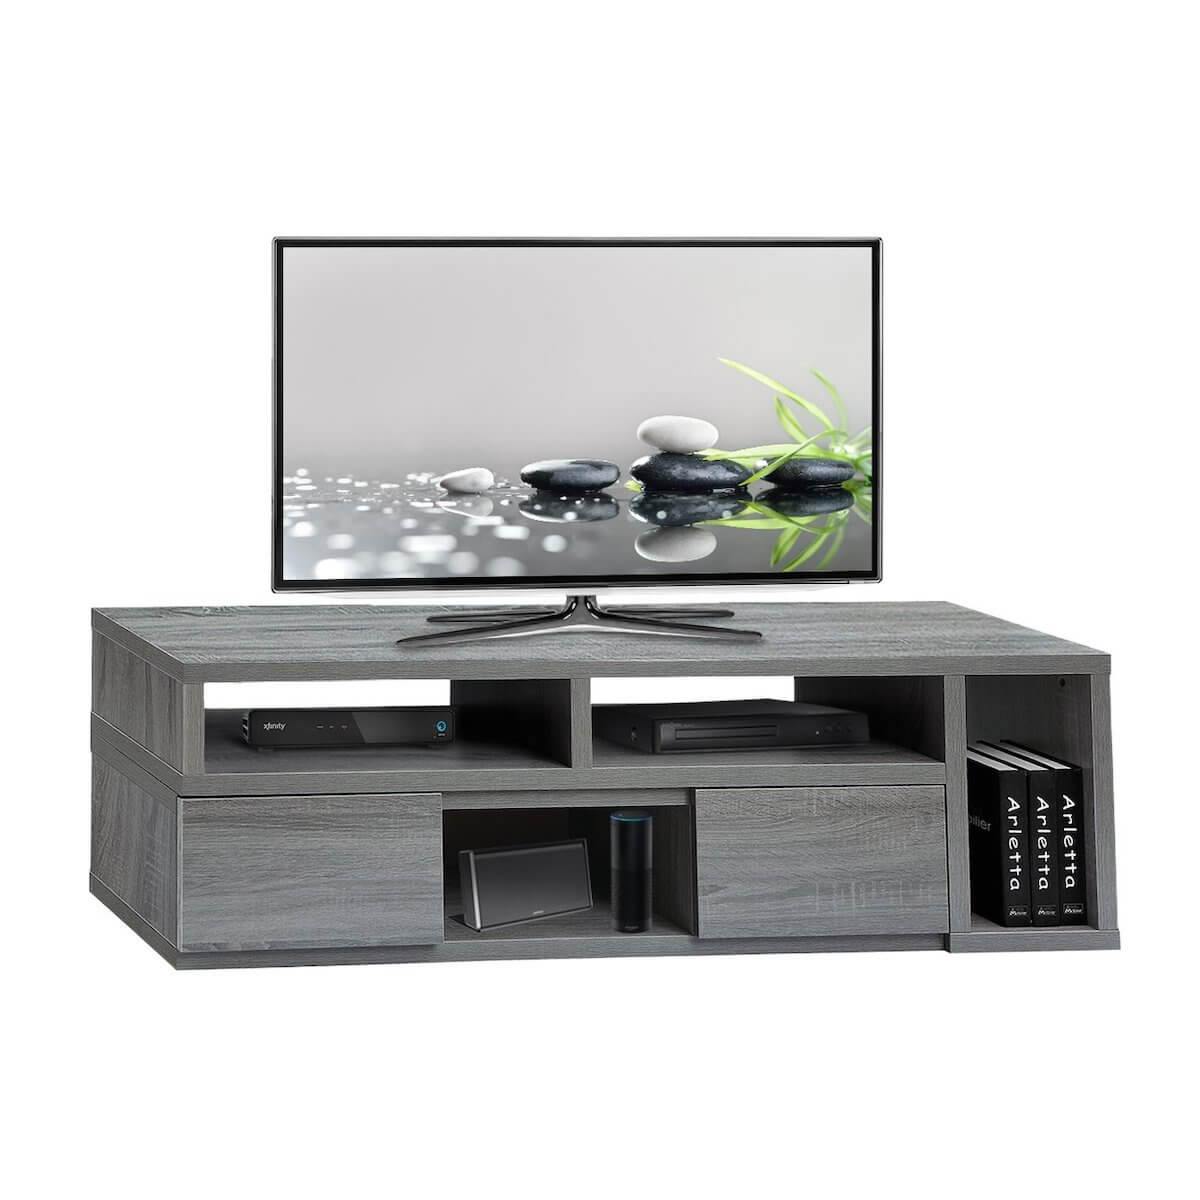 Techni Mobili Adjustable TV Stand Console for TVs Up to 65" RTA-7050-GRY with TV